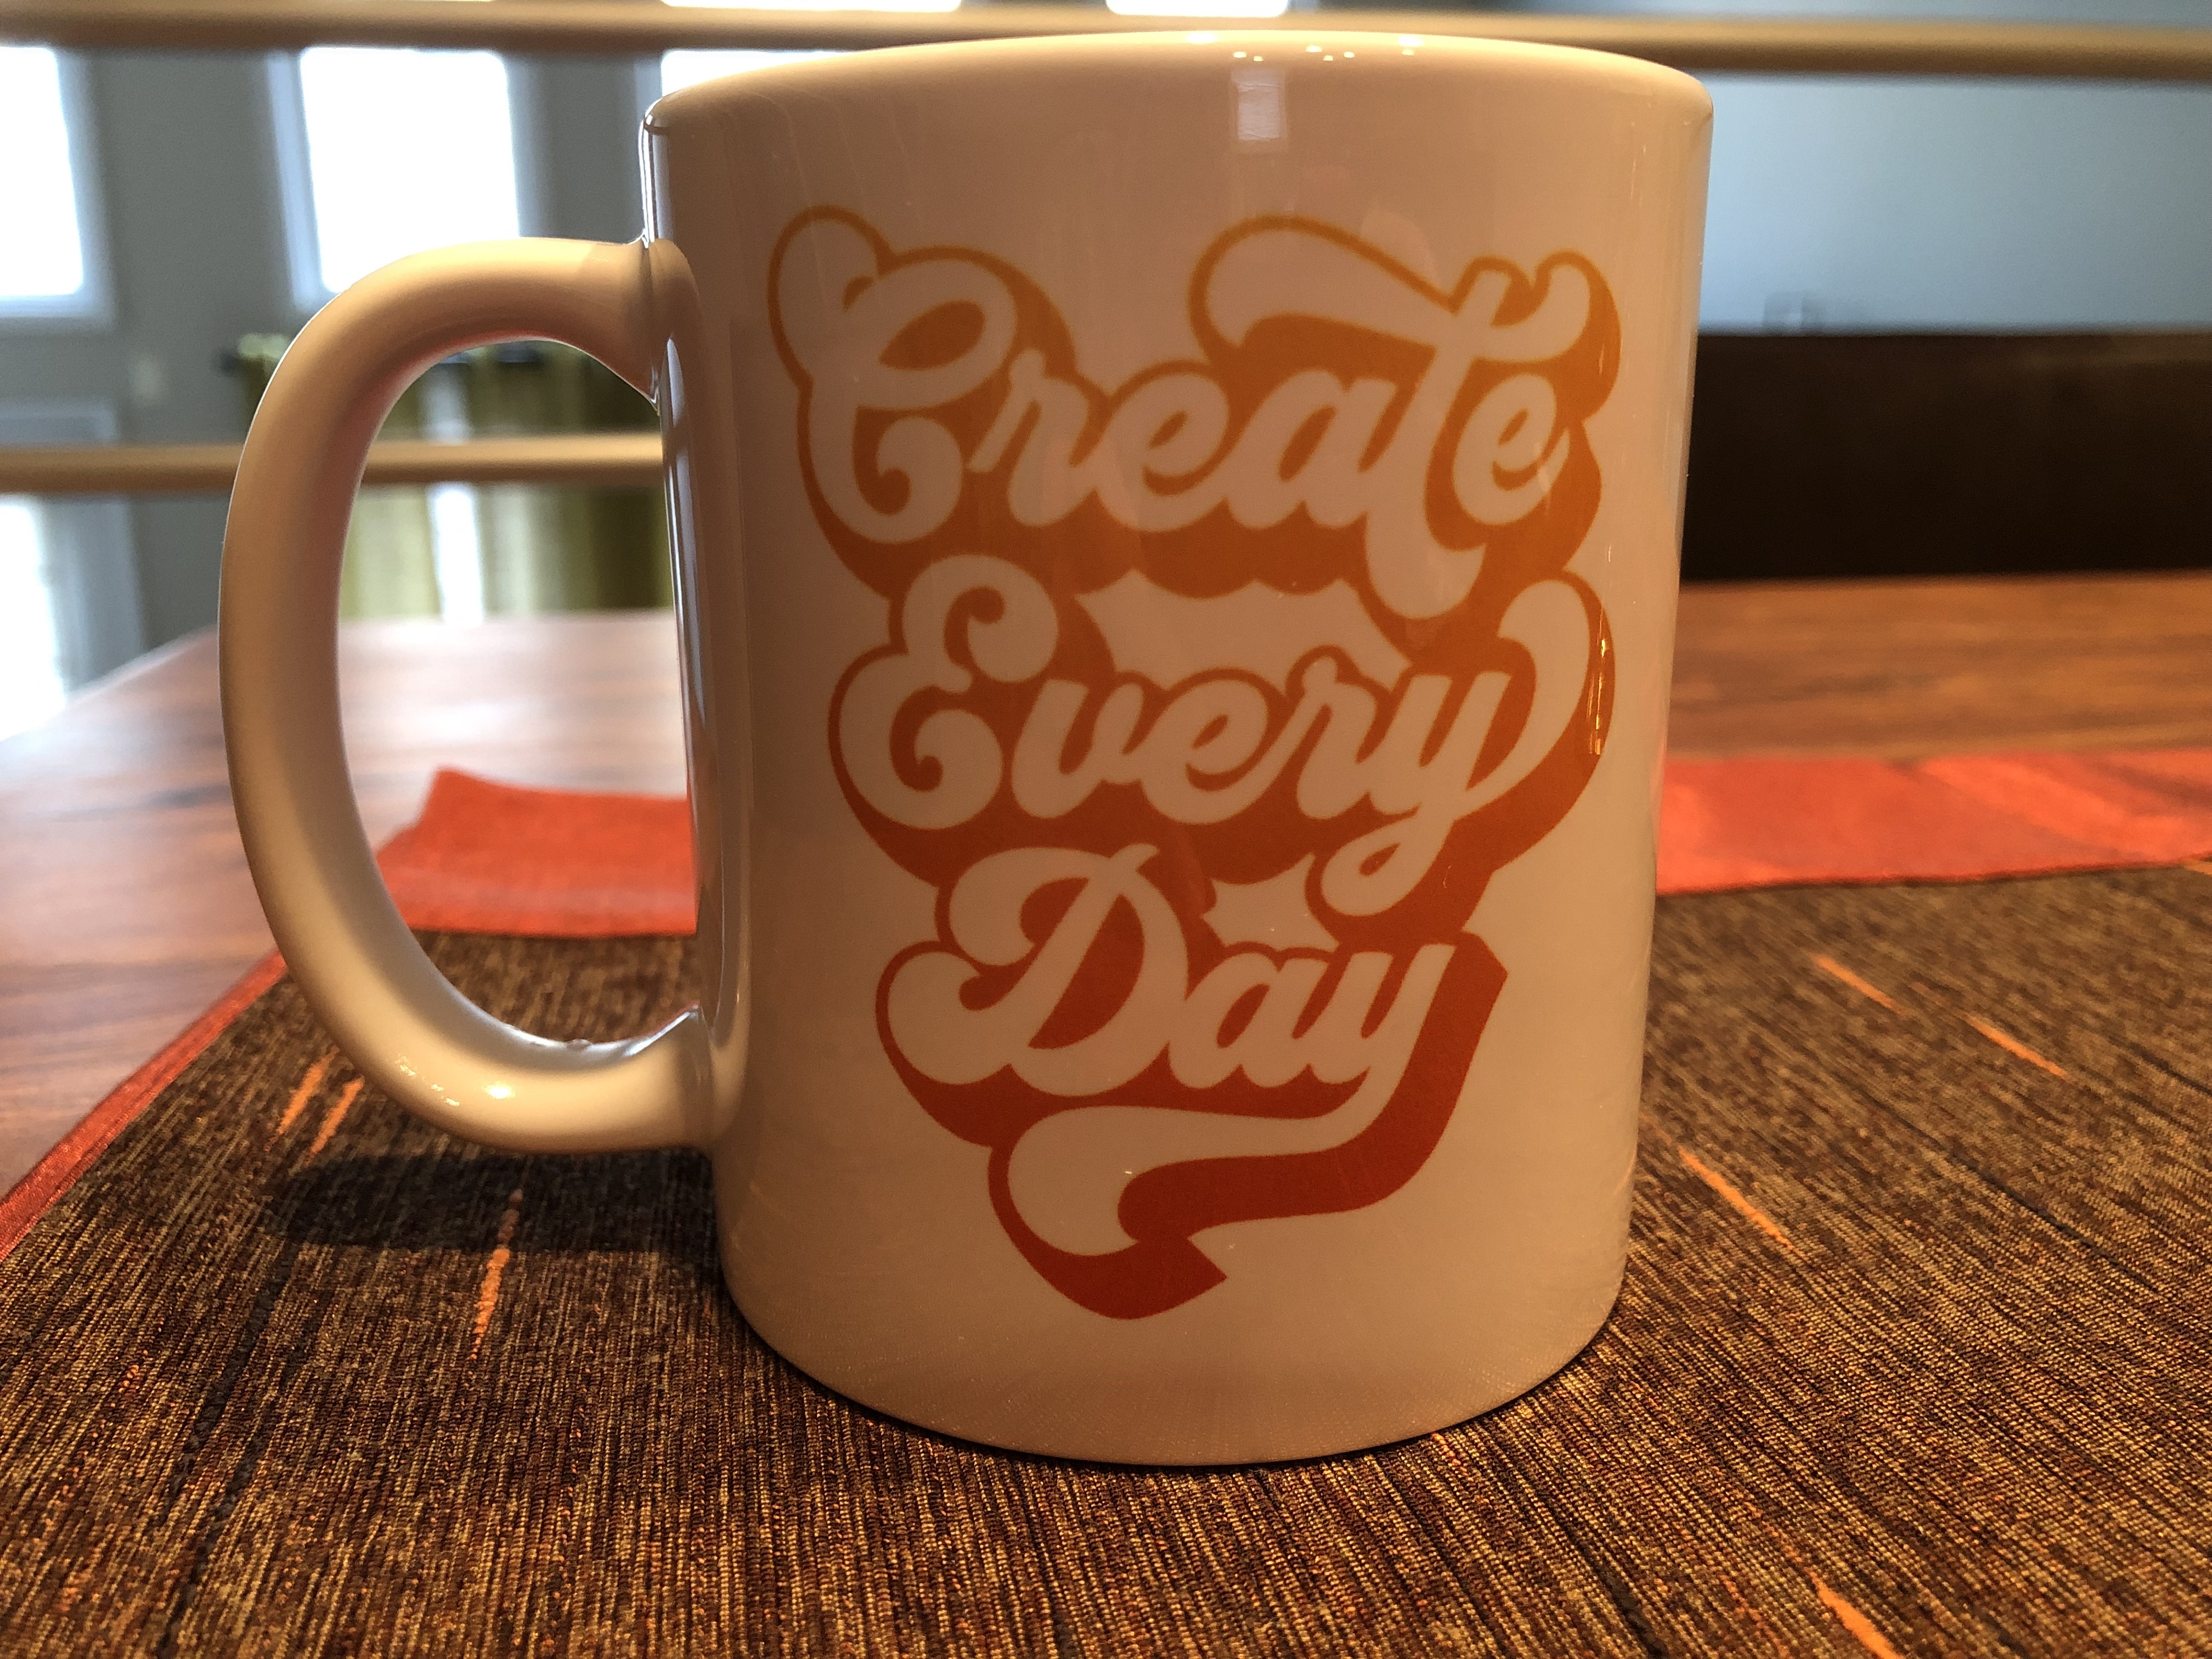 What is your most creative time of day?